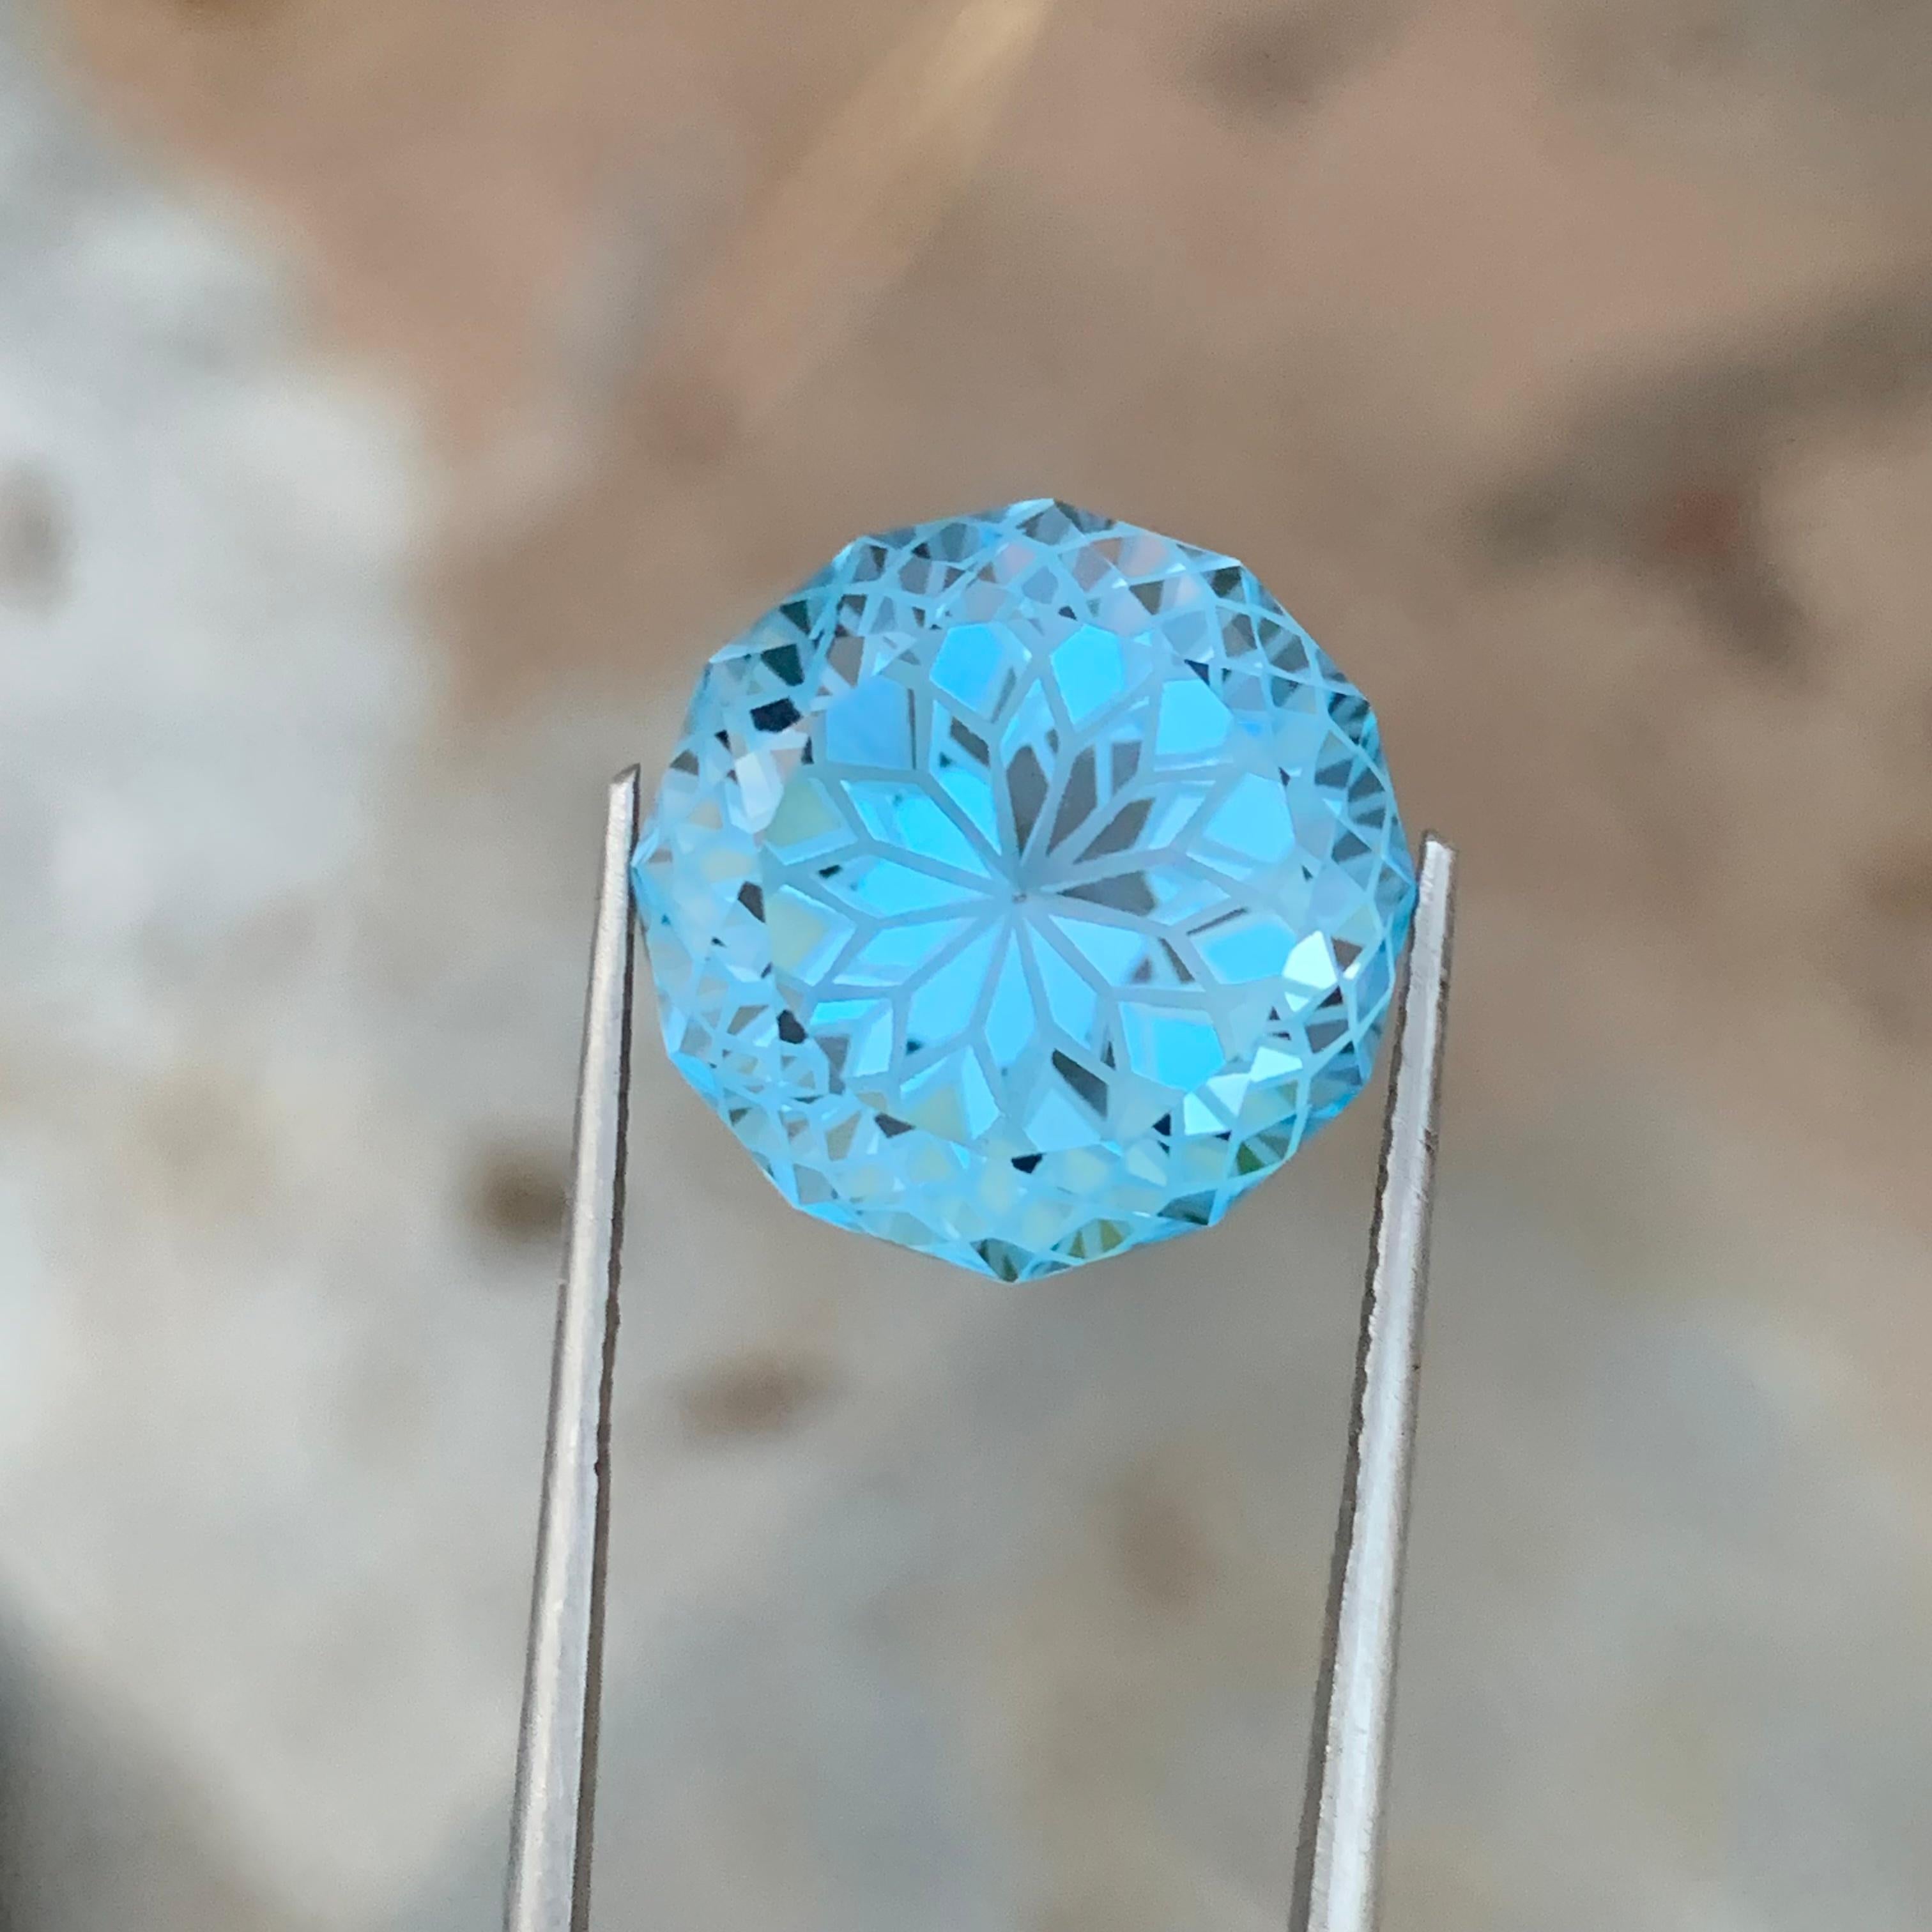 Captivating 19.65 Carats of Round Flower Cut Blue Topaz Gemstone Jewelry Making For Sale 5